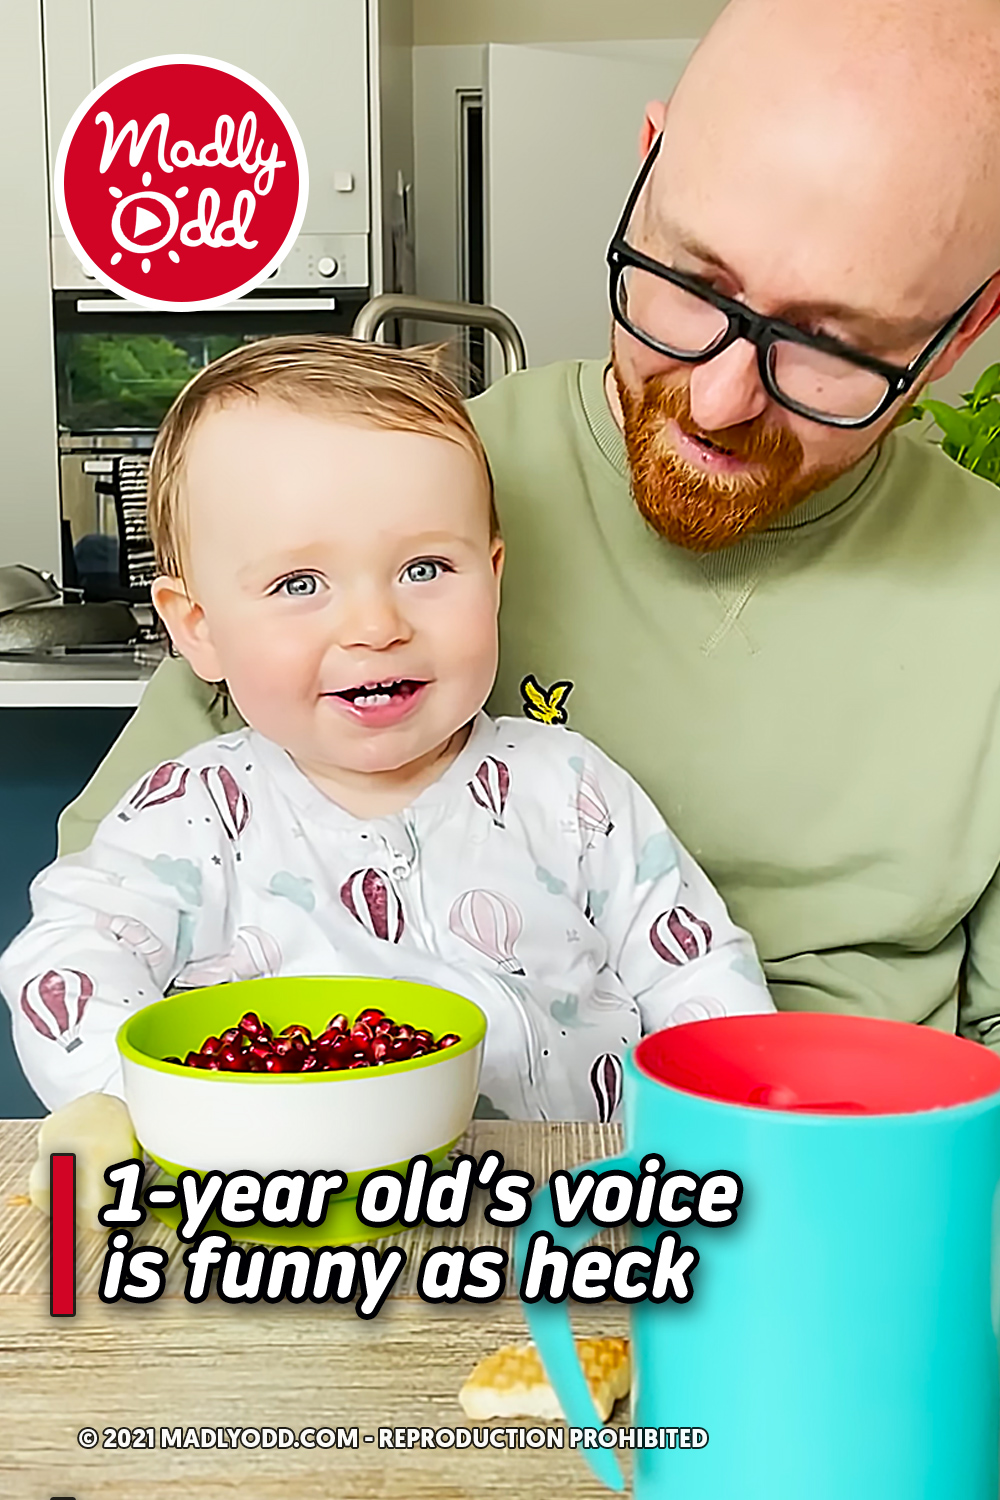 1-year old’s voice is funny as heck